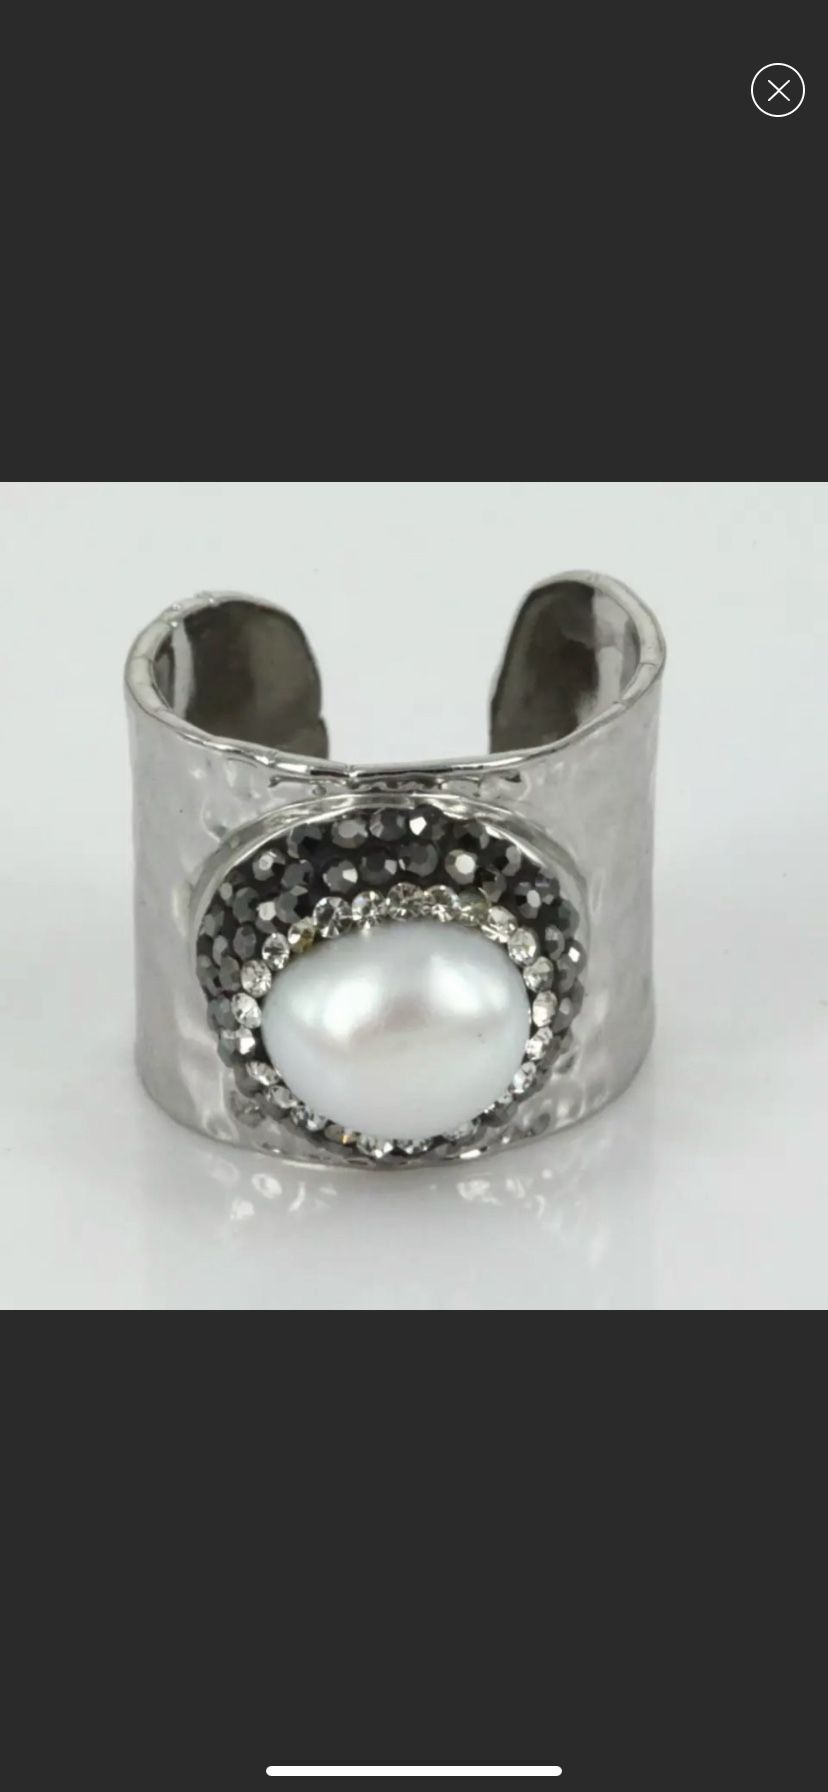 Real pearl ring